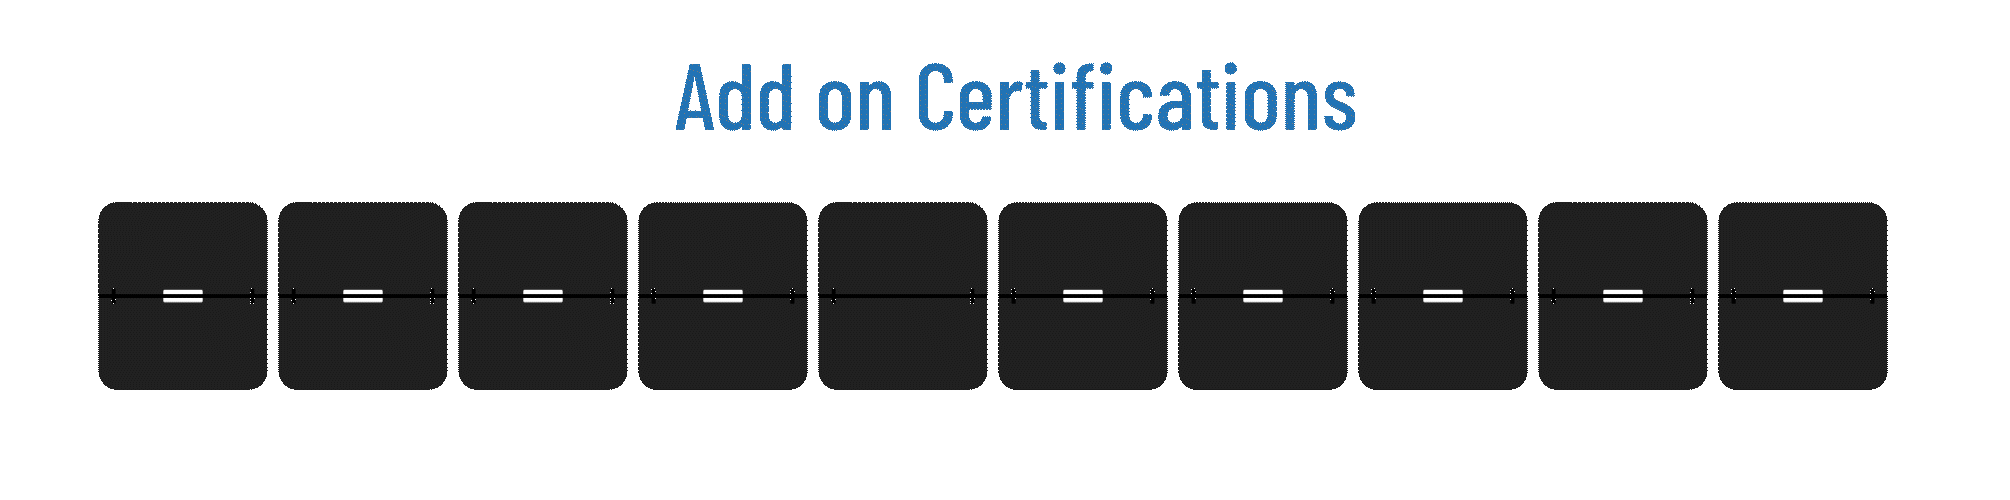 Add-On Certifications: Less than 1 week